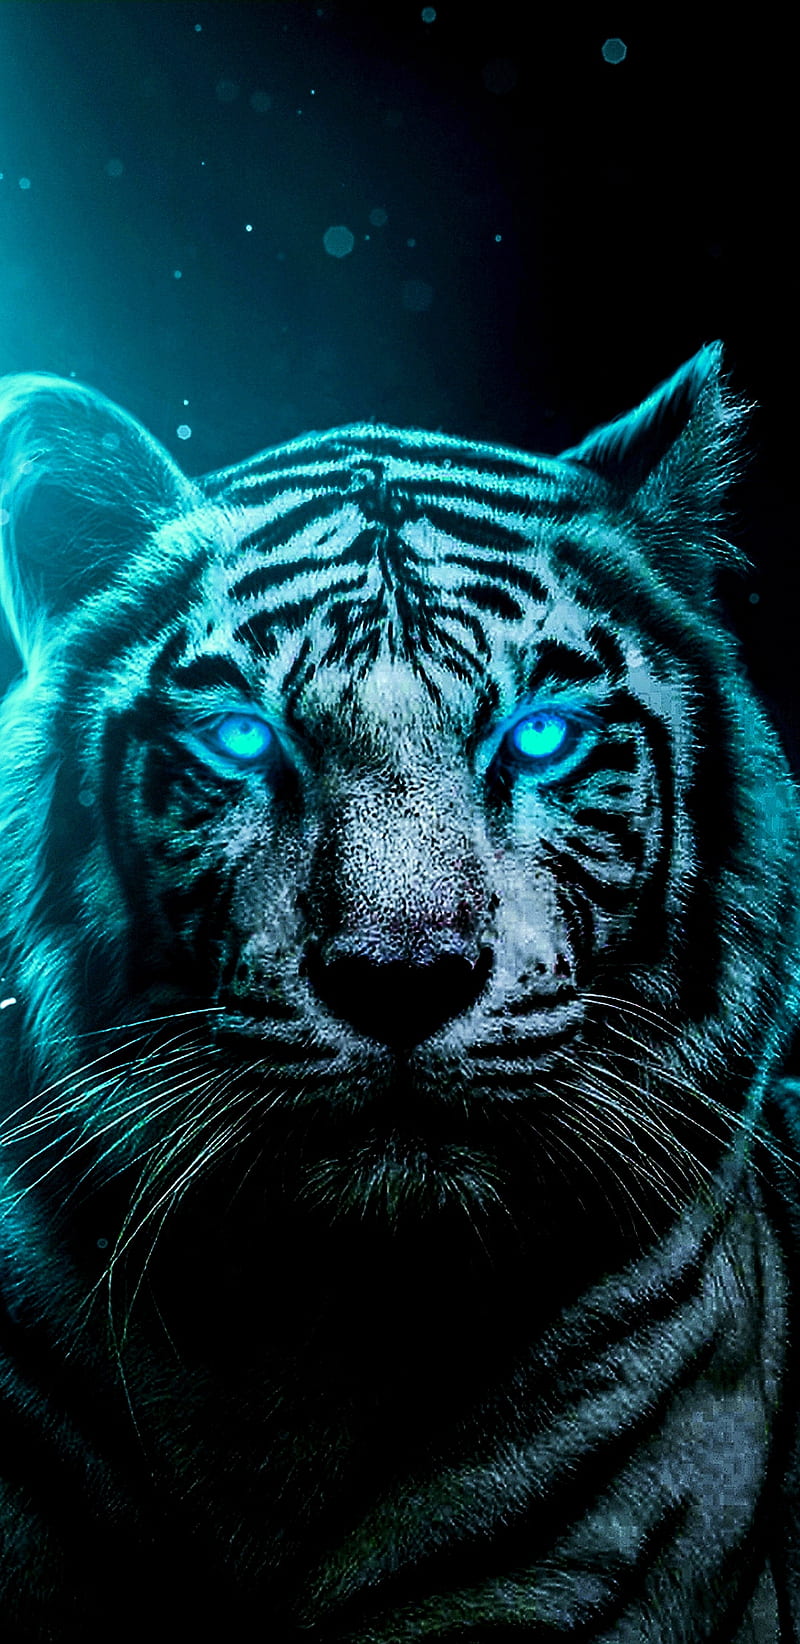 Angry raging white tiger wallpaper background  Gnomelookorg